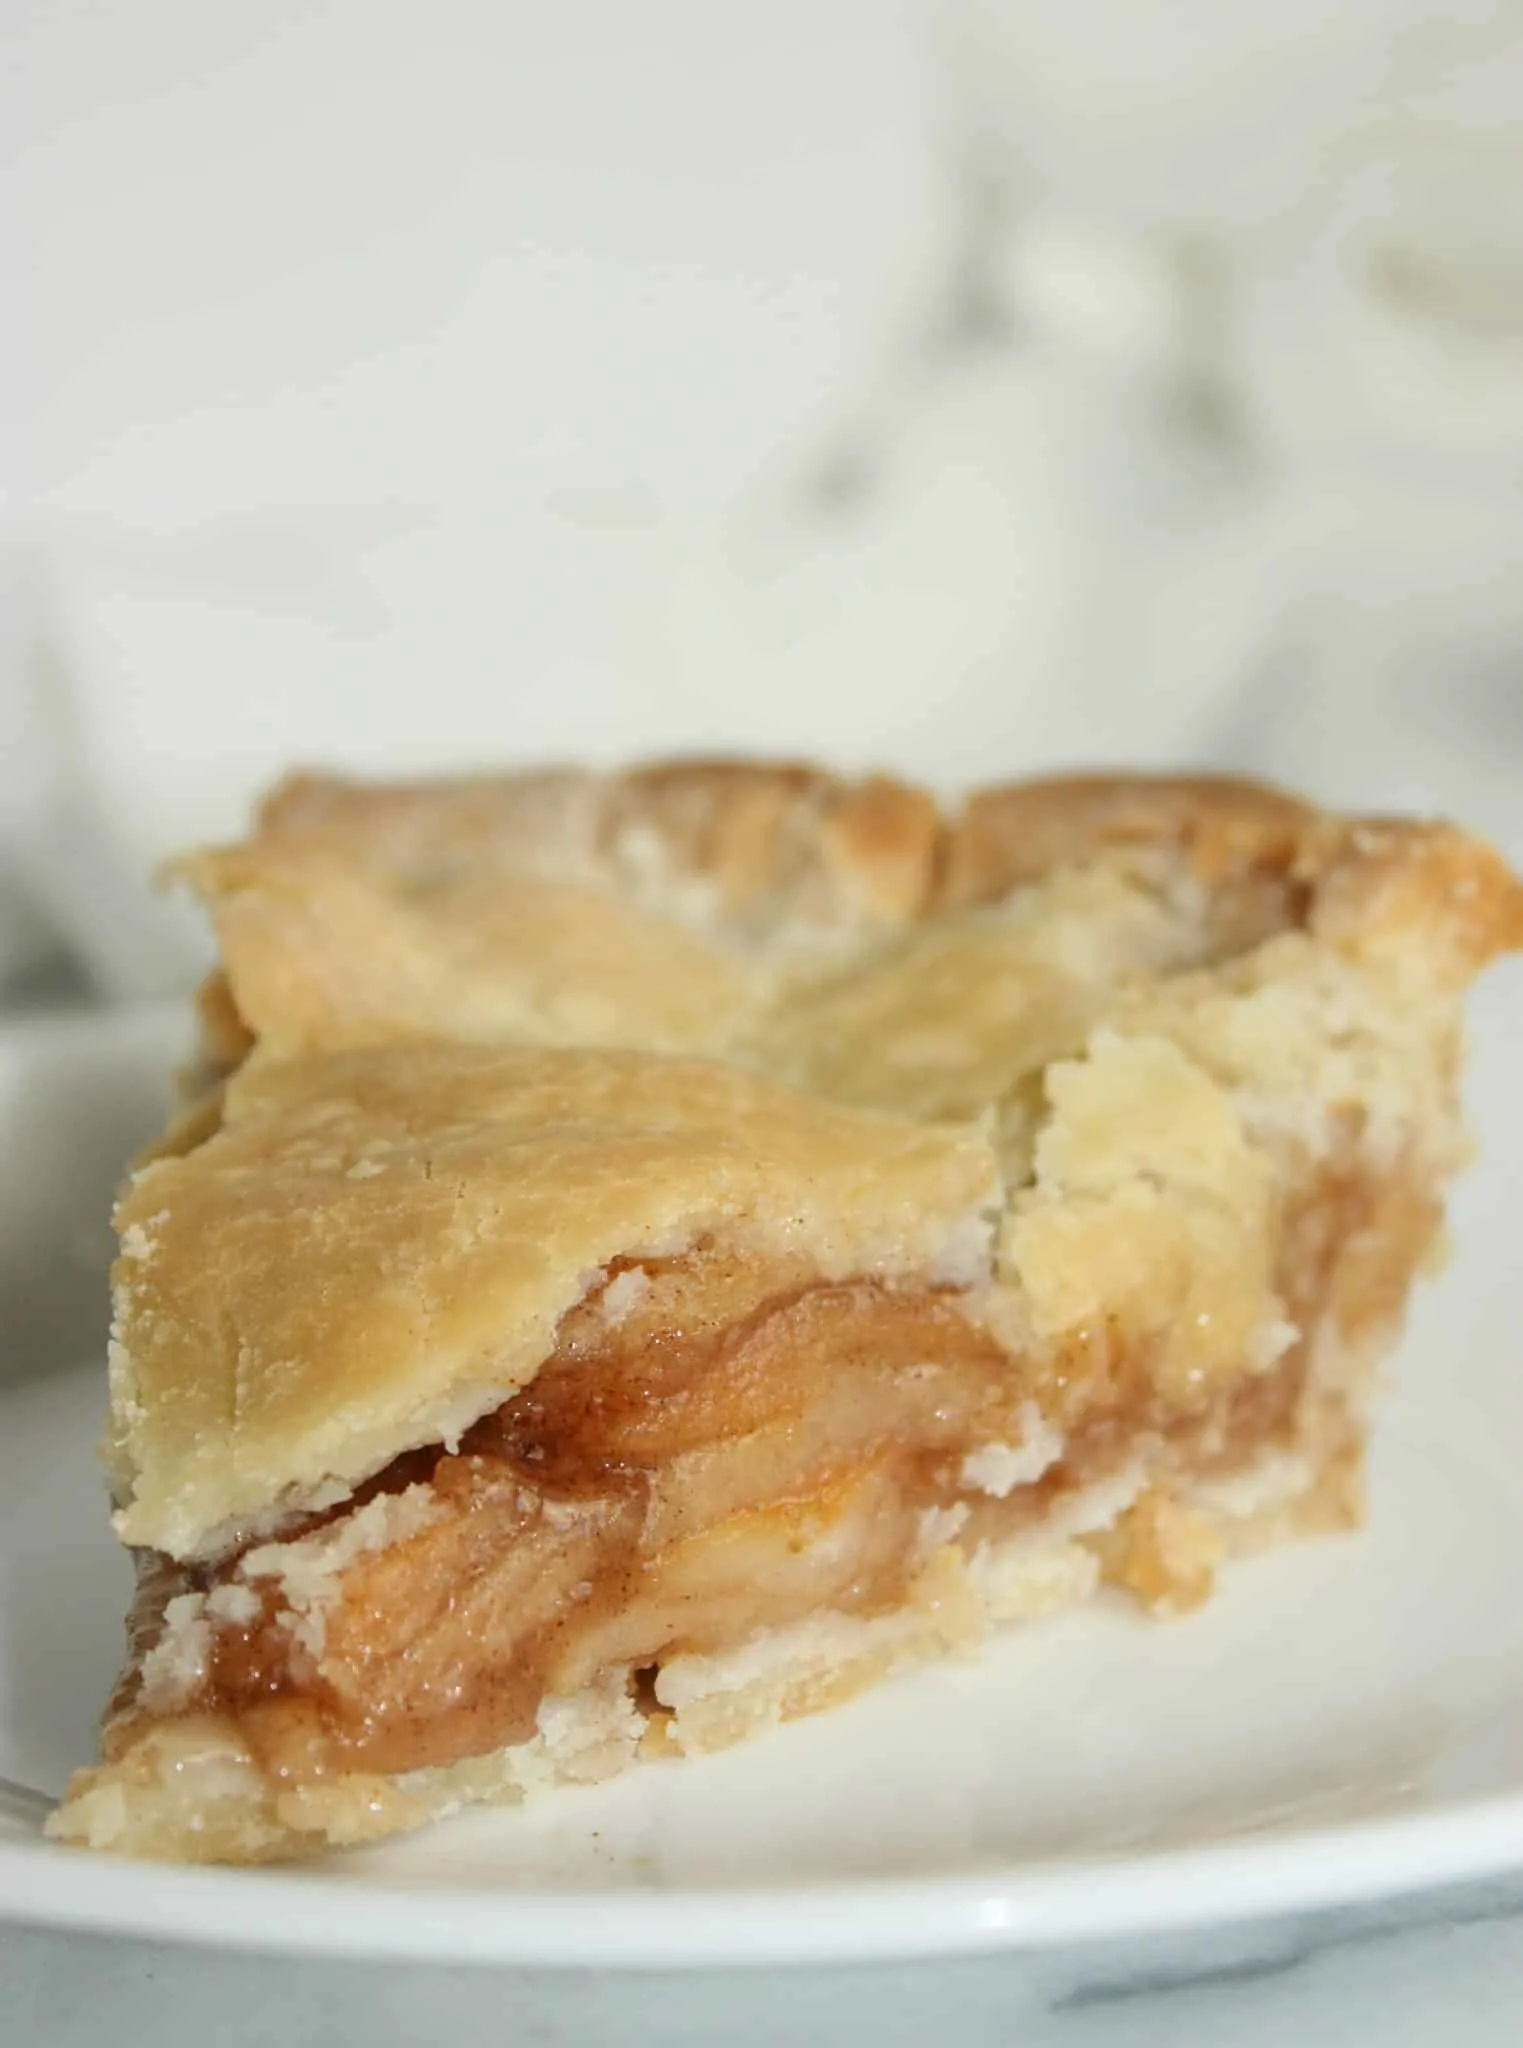 Apple Pie is a great way to use up some of our wind fall apples.  I look forward to this tasty dessert every year when the trees are laden with apples.